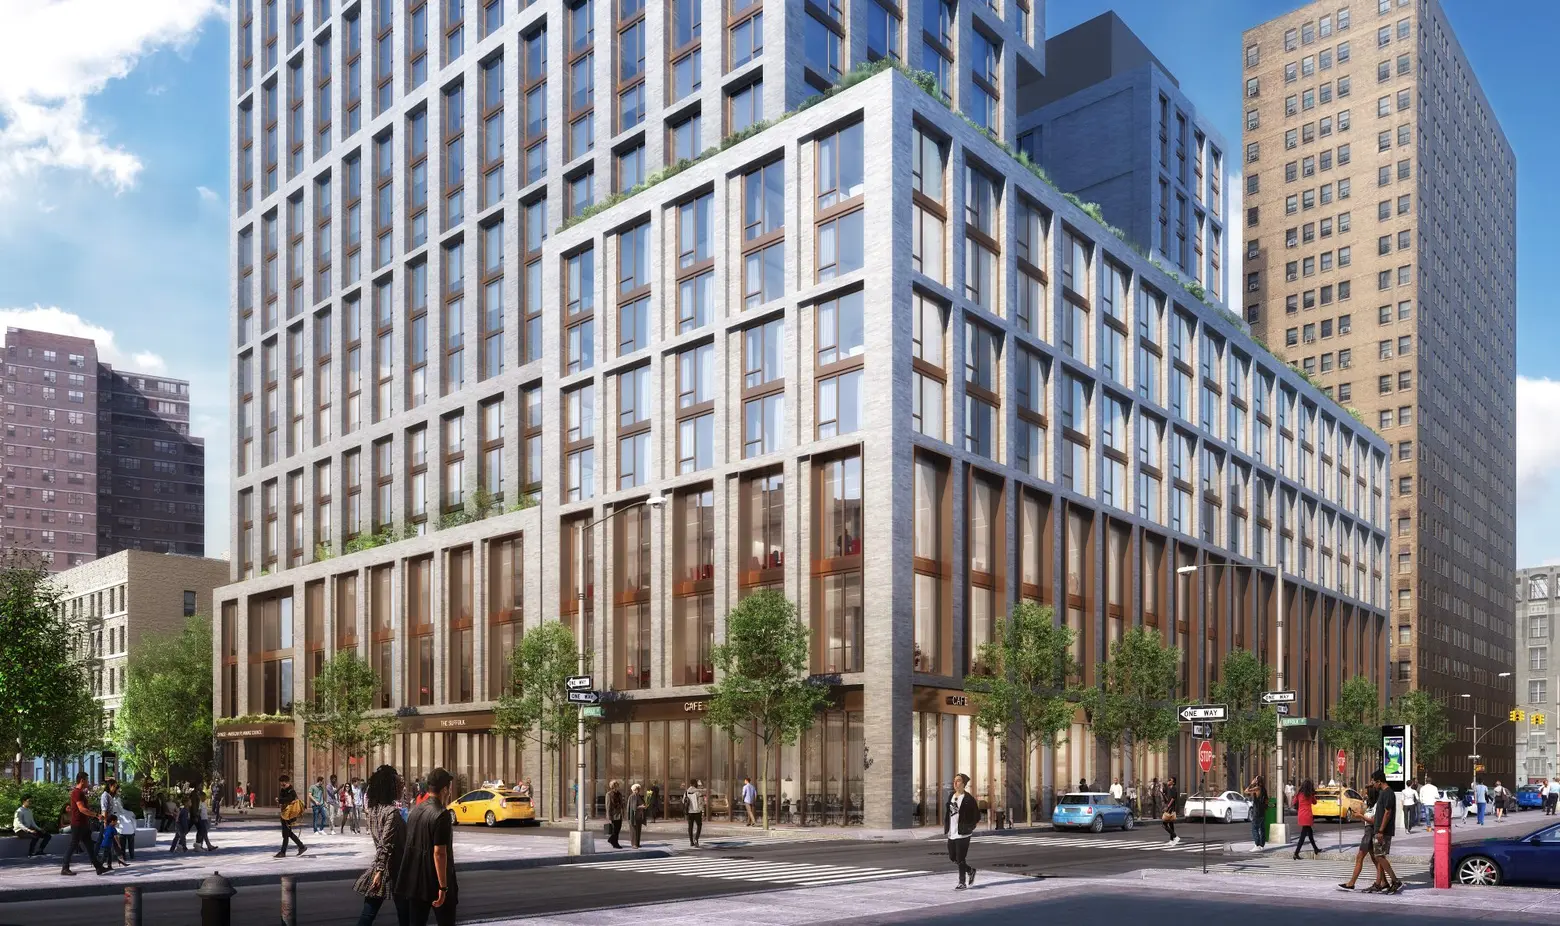 At former LES synagogue site, lottery opens for 86 affordable senior units, from $654/month